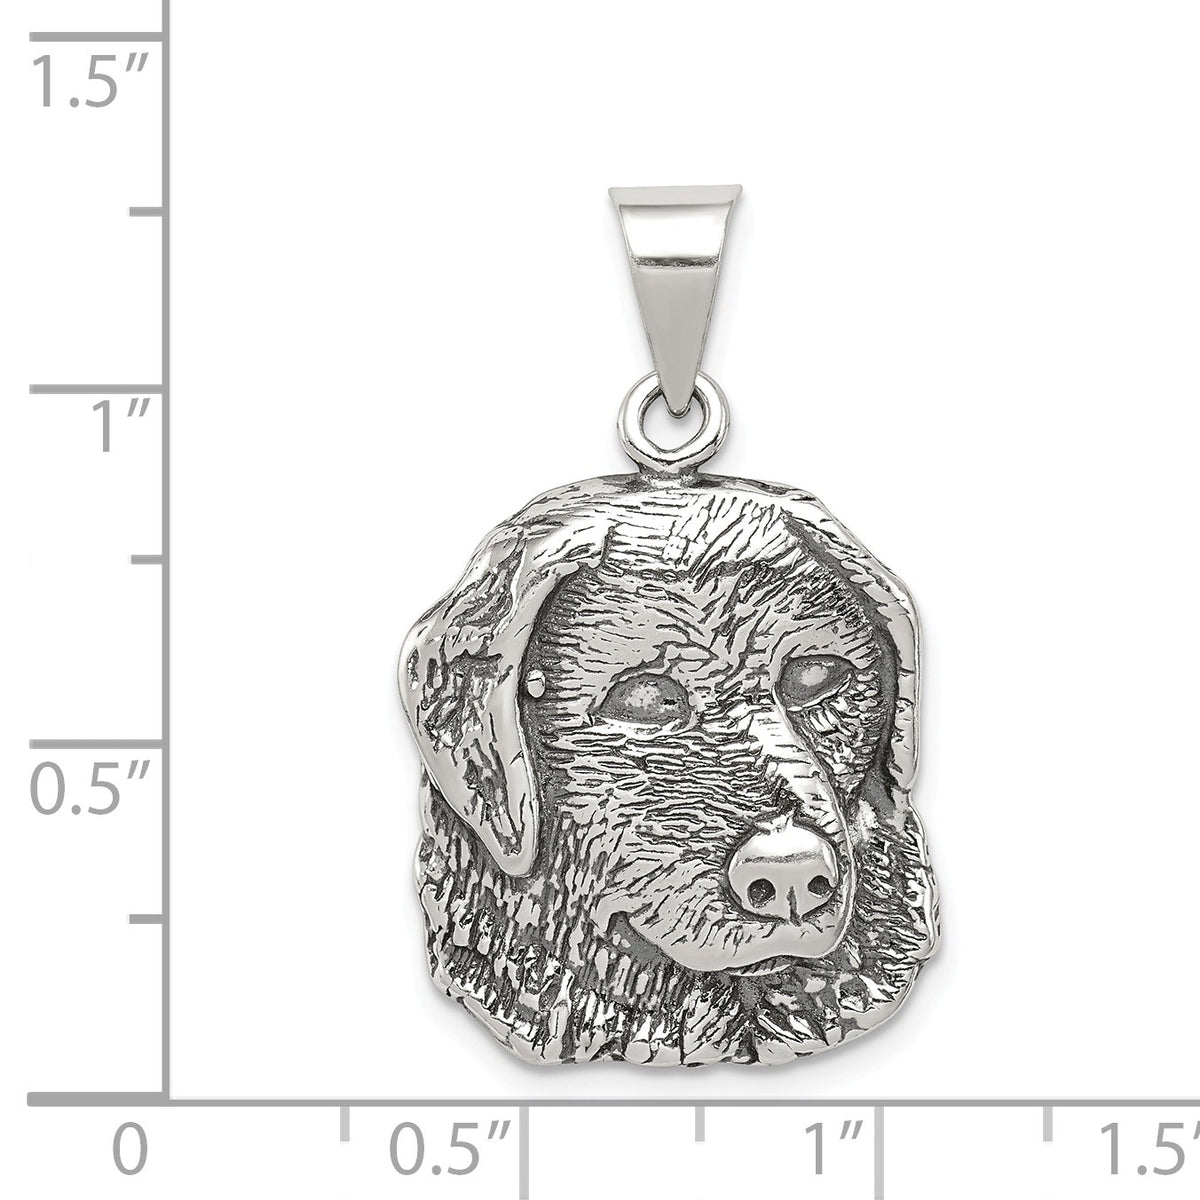 Alternate view of the Sterling Silver 20mm Antiqued Dog Head Pendant by The Black Bow Jewelry Co.